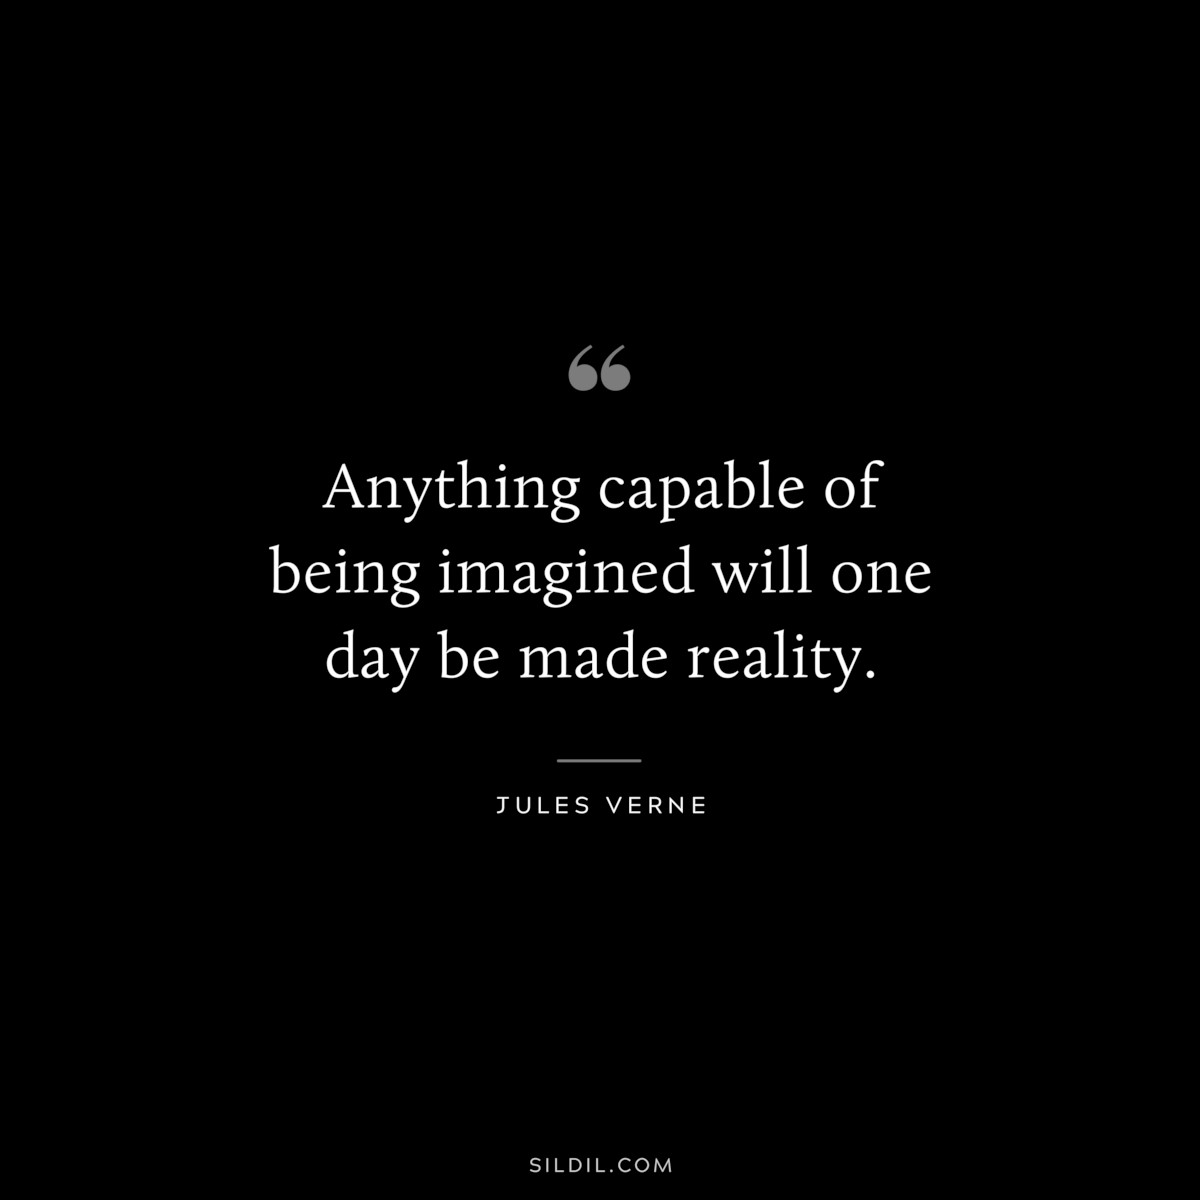 Anything capable of being imagined will one day be made reality.